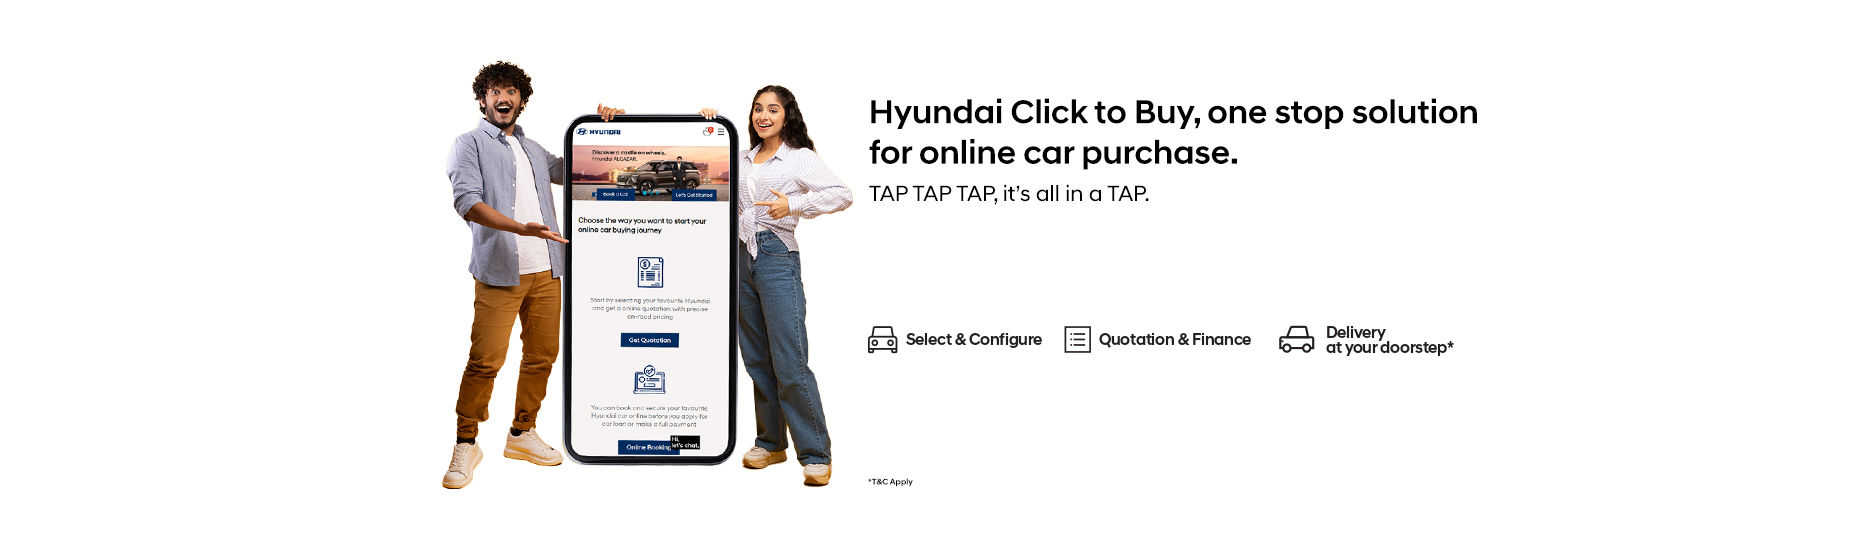 Hyundai Click to buy for online booking